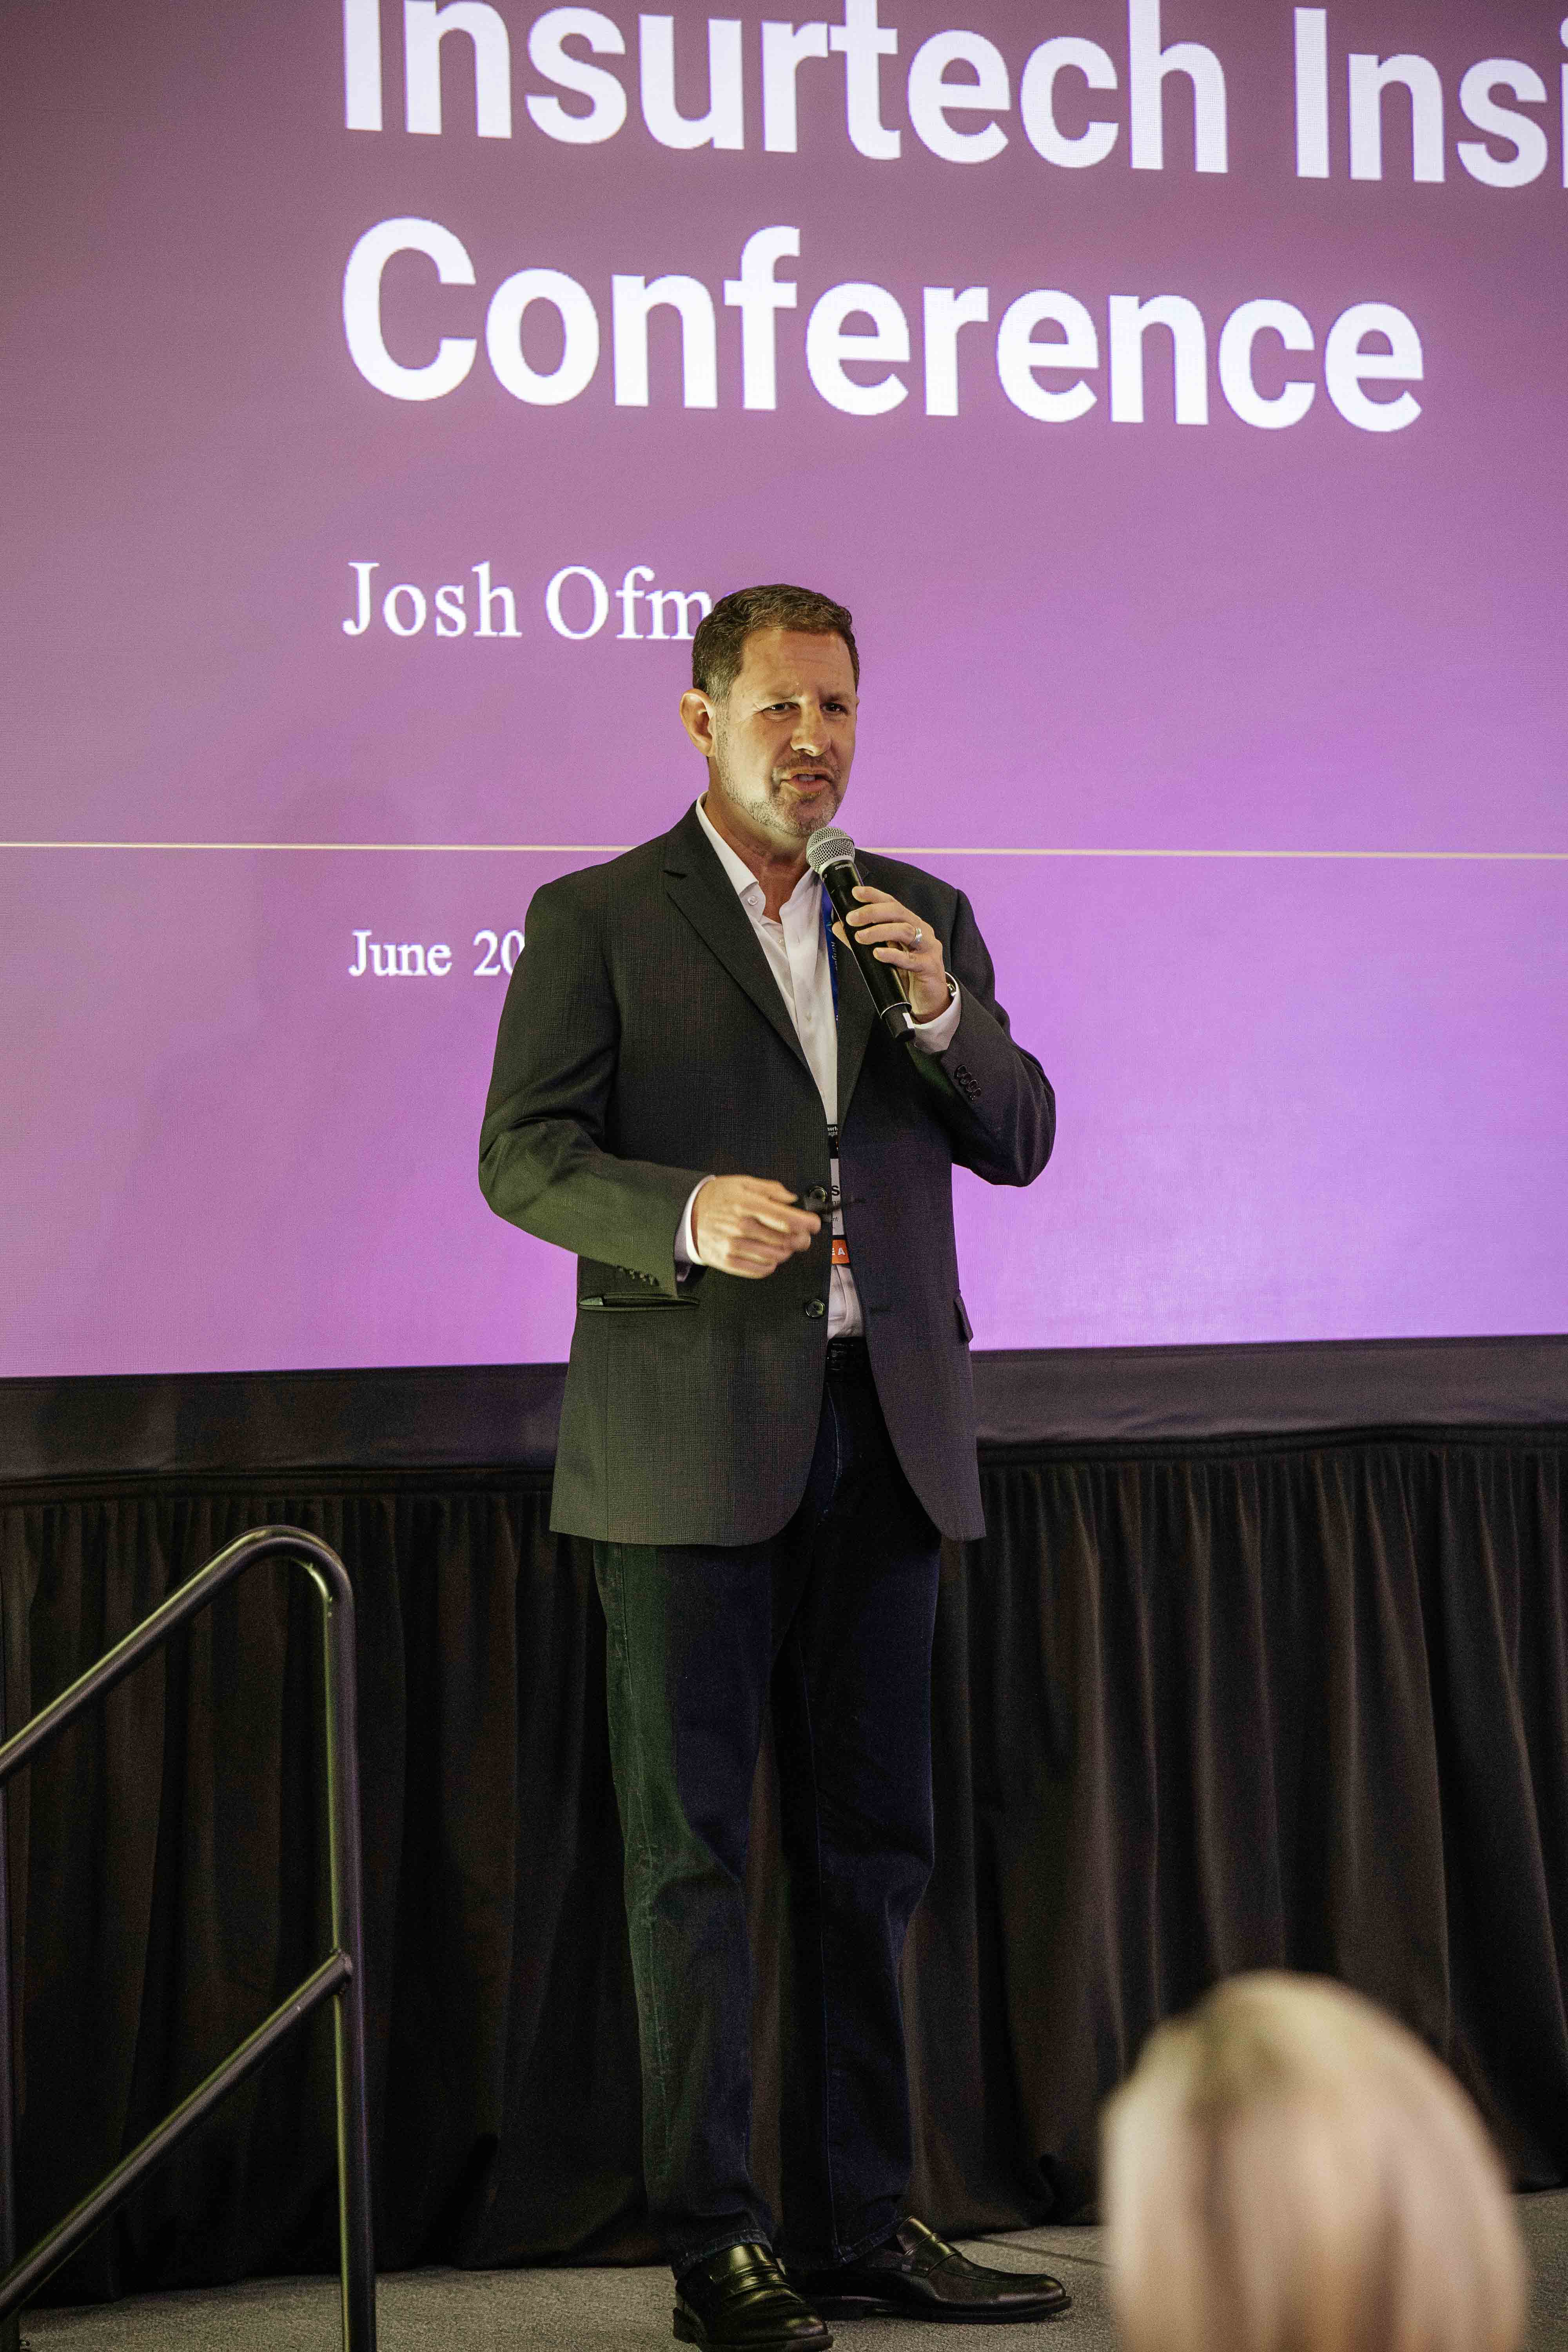 Josh Ofman, MD, MSHS, President of GRAIL, LLC, delivered an impactful 15-minute presentation on the Tech Stage